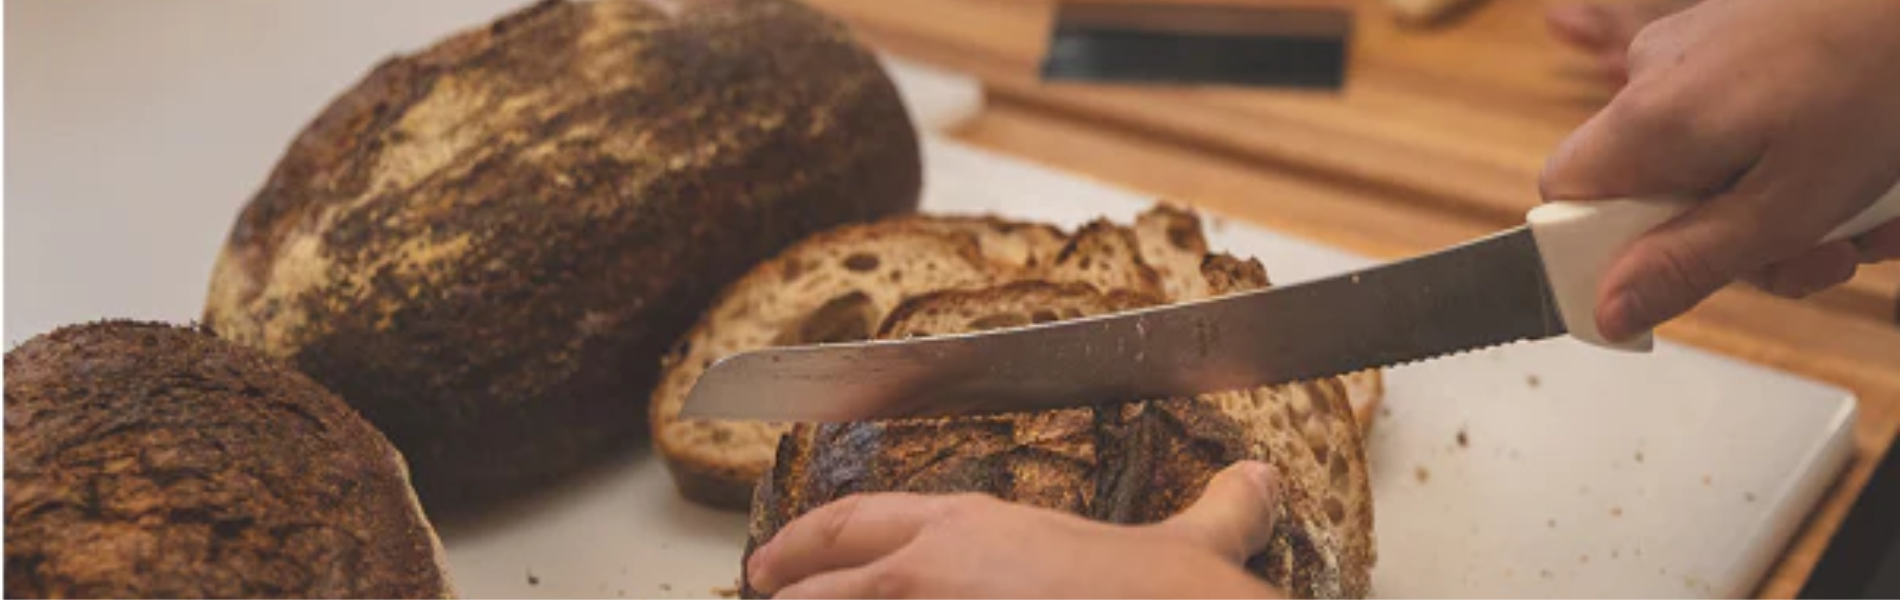 Bread and Sandwich Knives